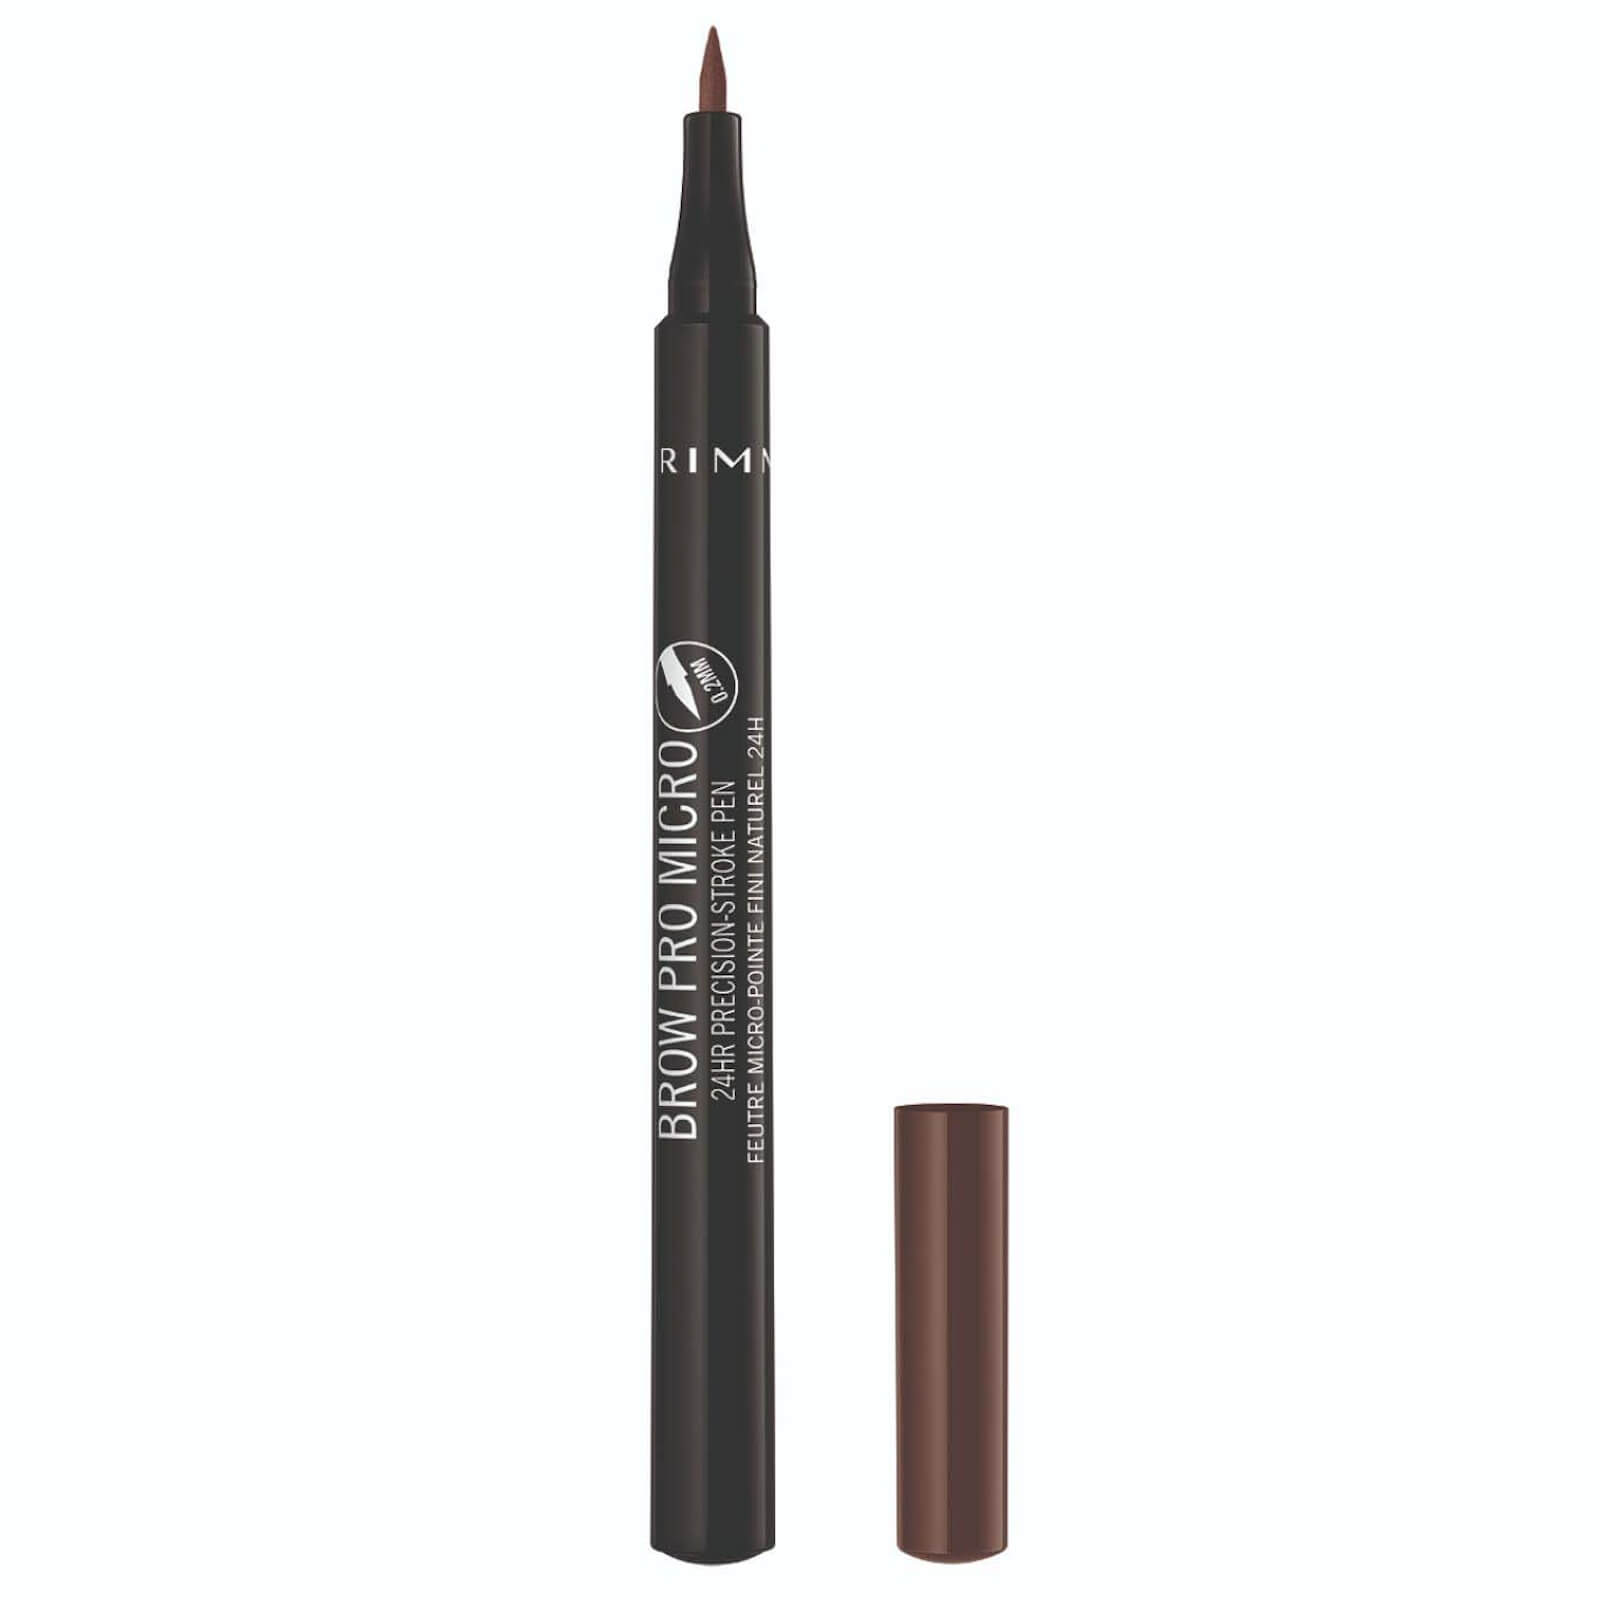 Image of Rimmel Brow Pro Micro 24HR Precision-Stroke Pen 1ml (Various Shades) - 003 Soft Brown